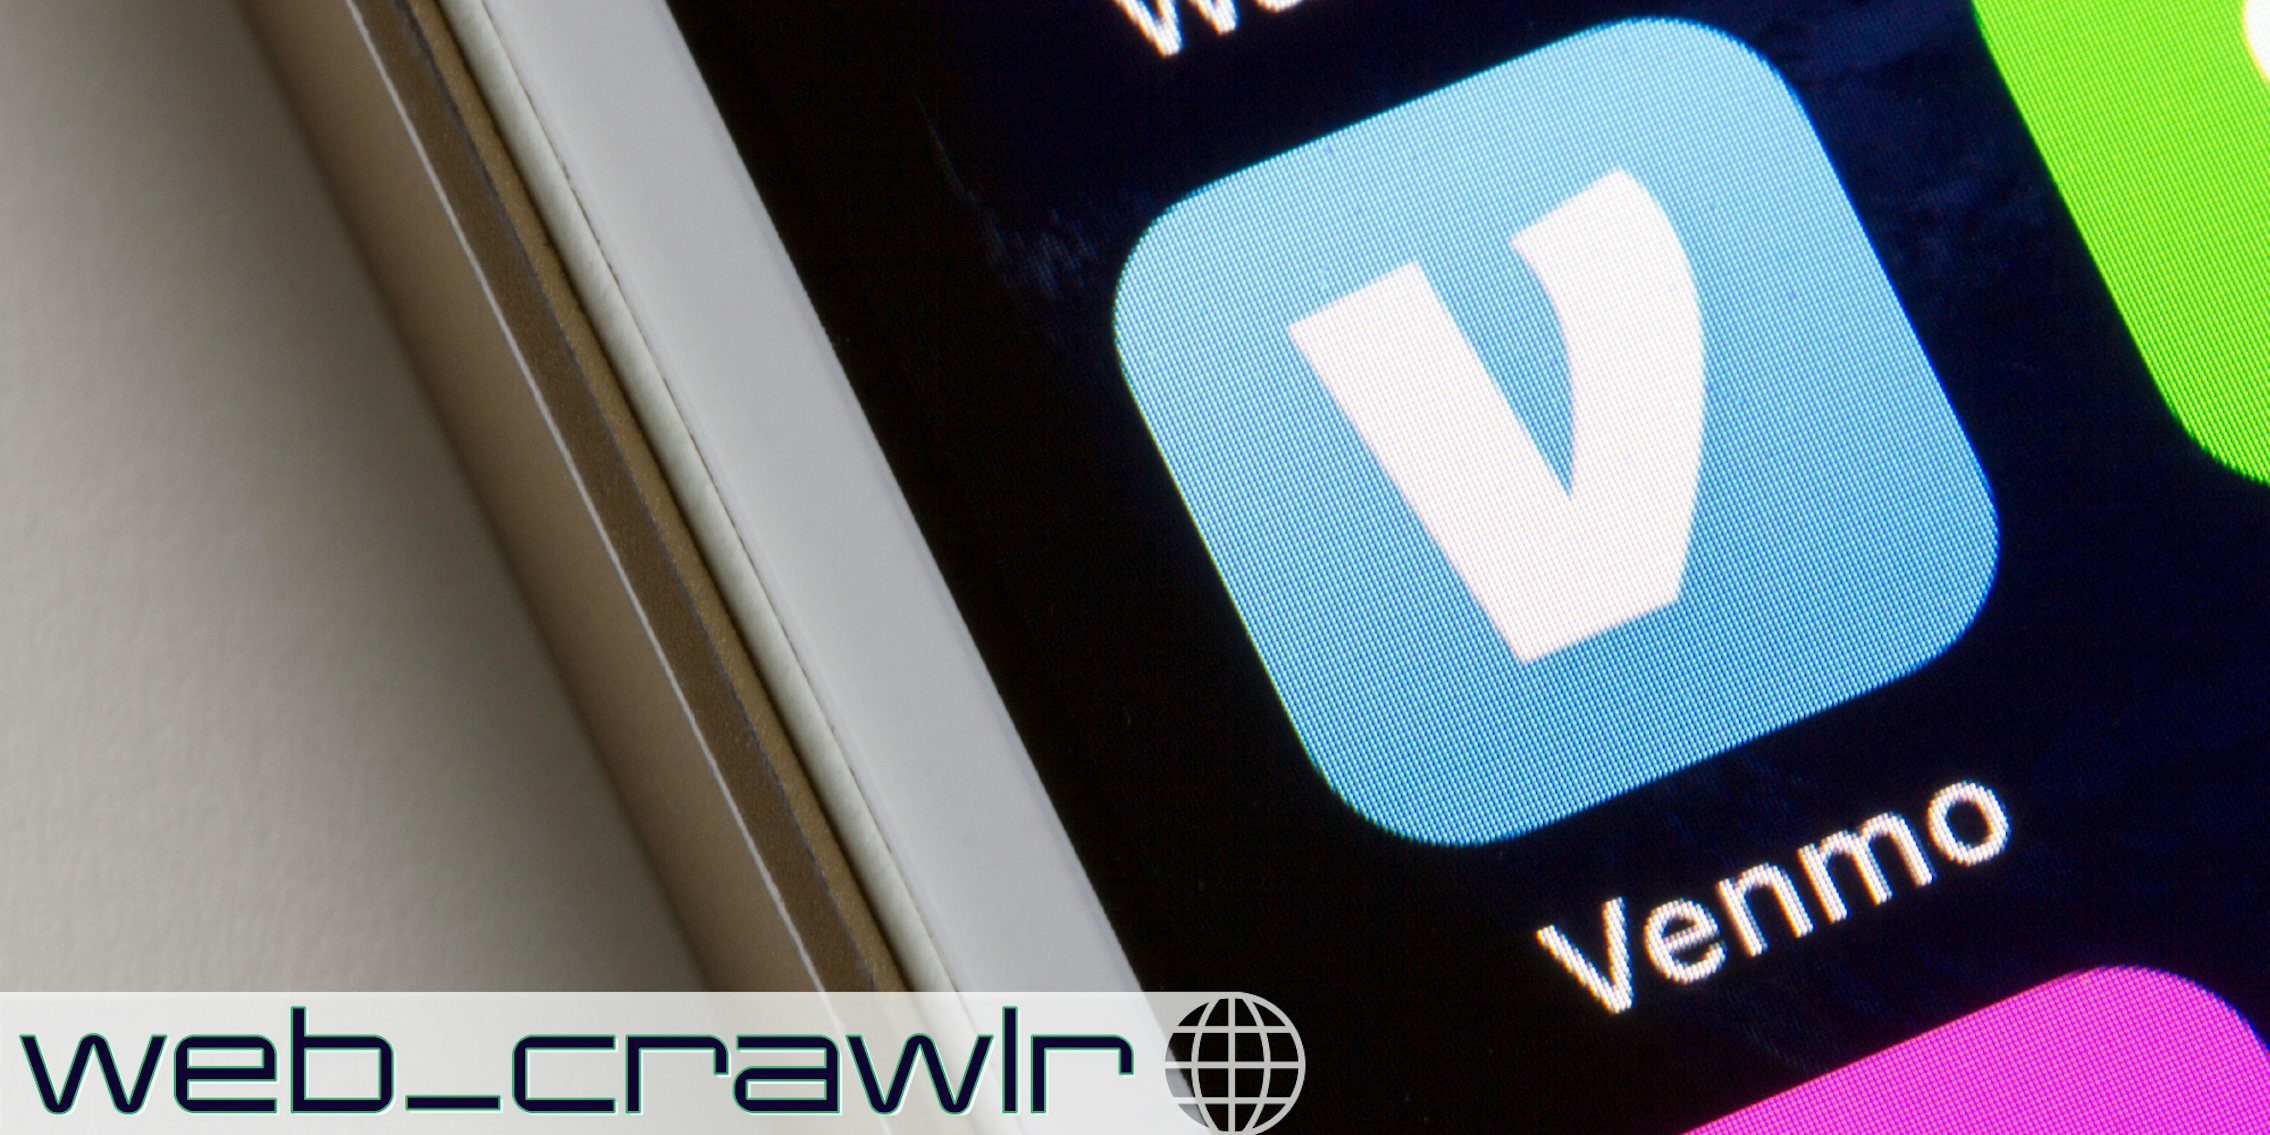 Venmo mobile app icon is seen on a smartphone. The Daily Dot newsletter web_crawlr logo is in the bottom left corner.